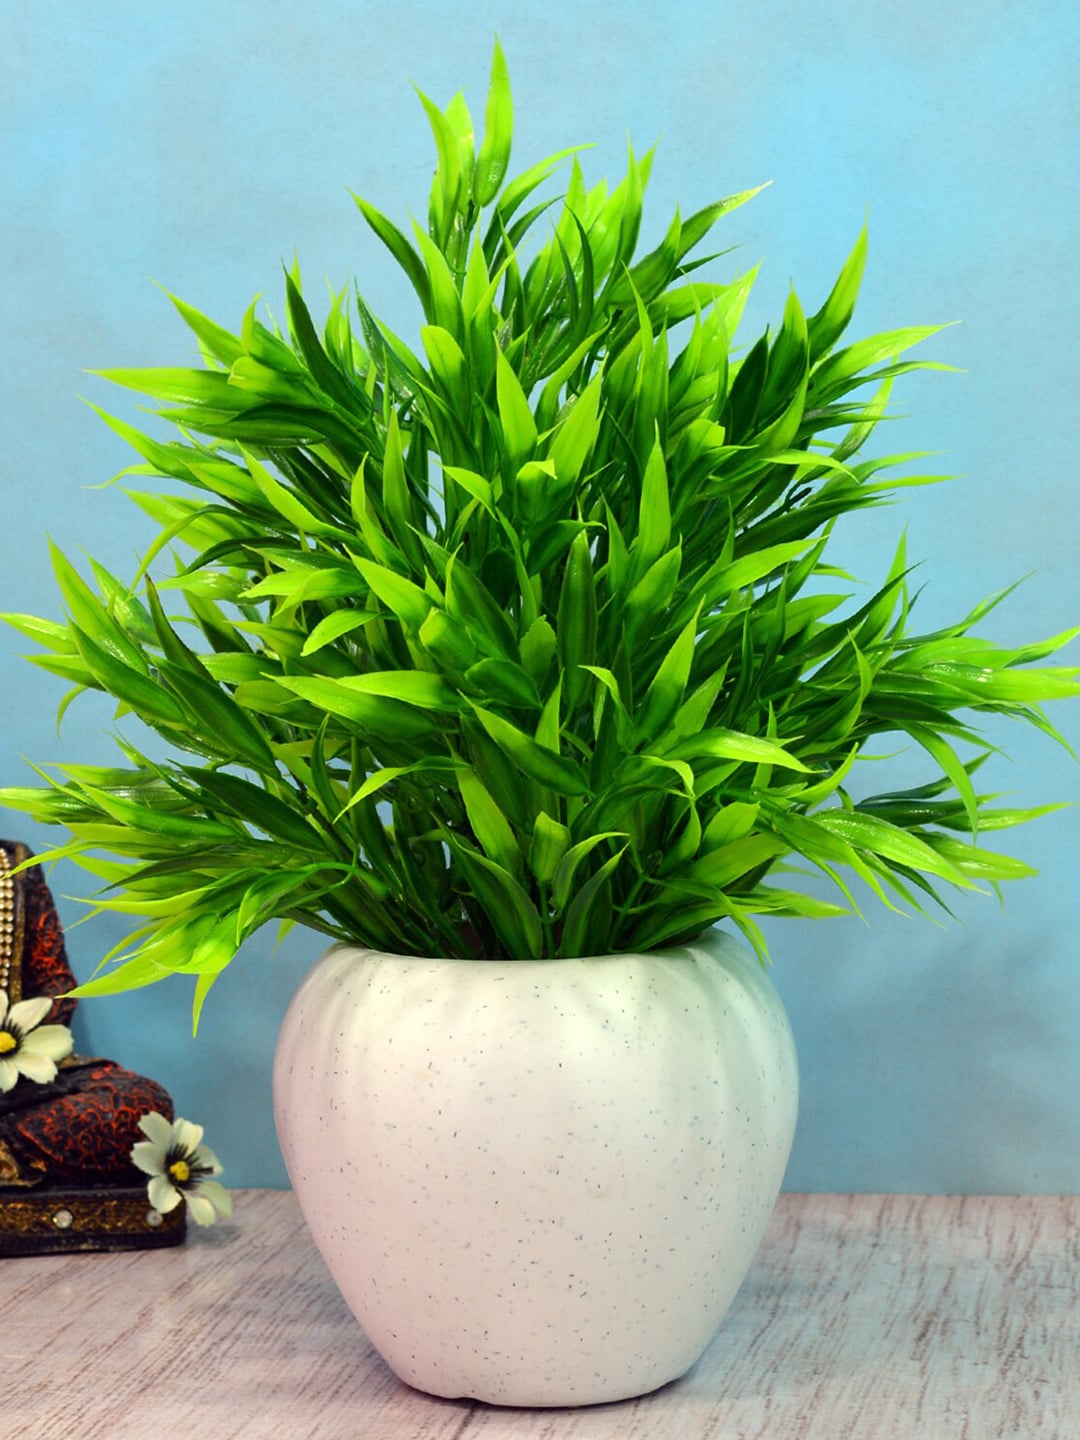 fancy mart Green & White Artificial Bamboo Leaves In Apple Pot Price in India